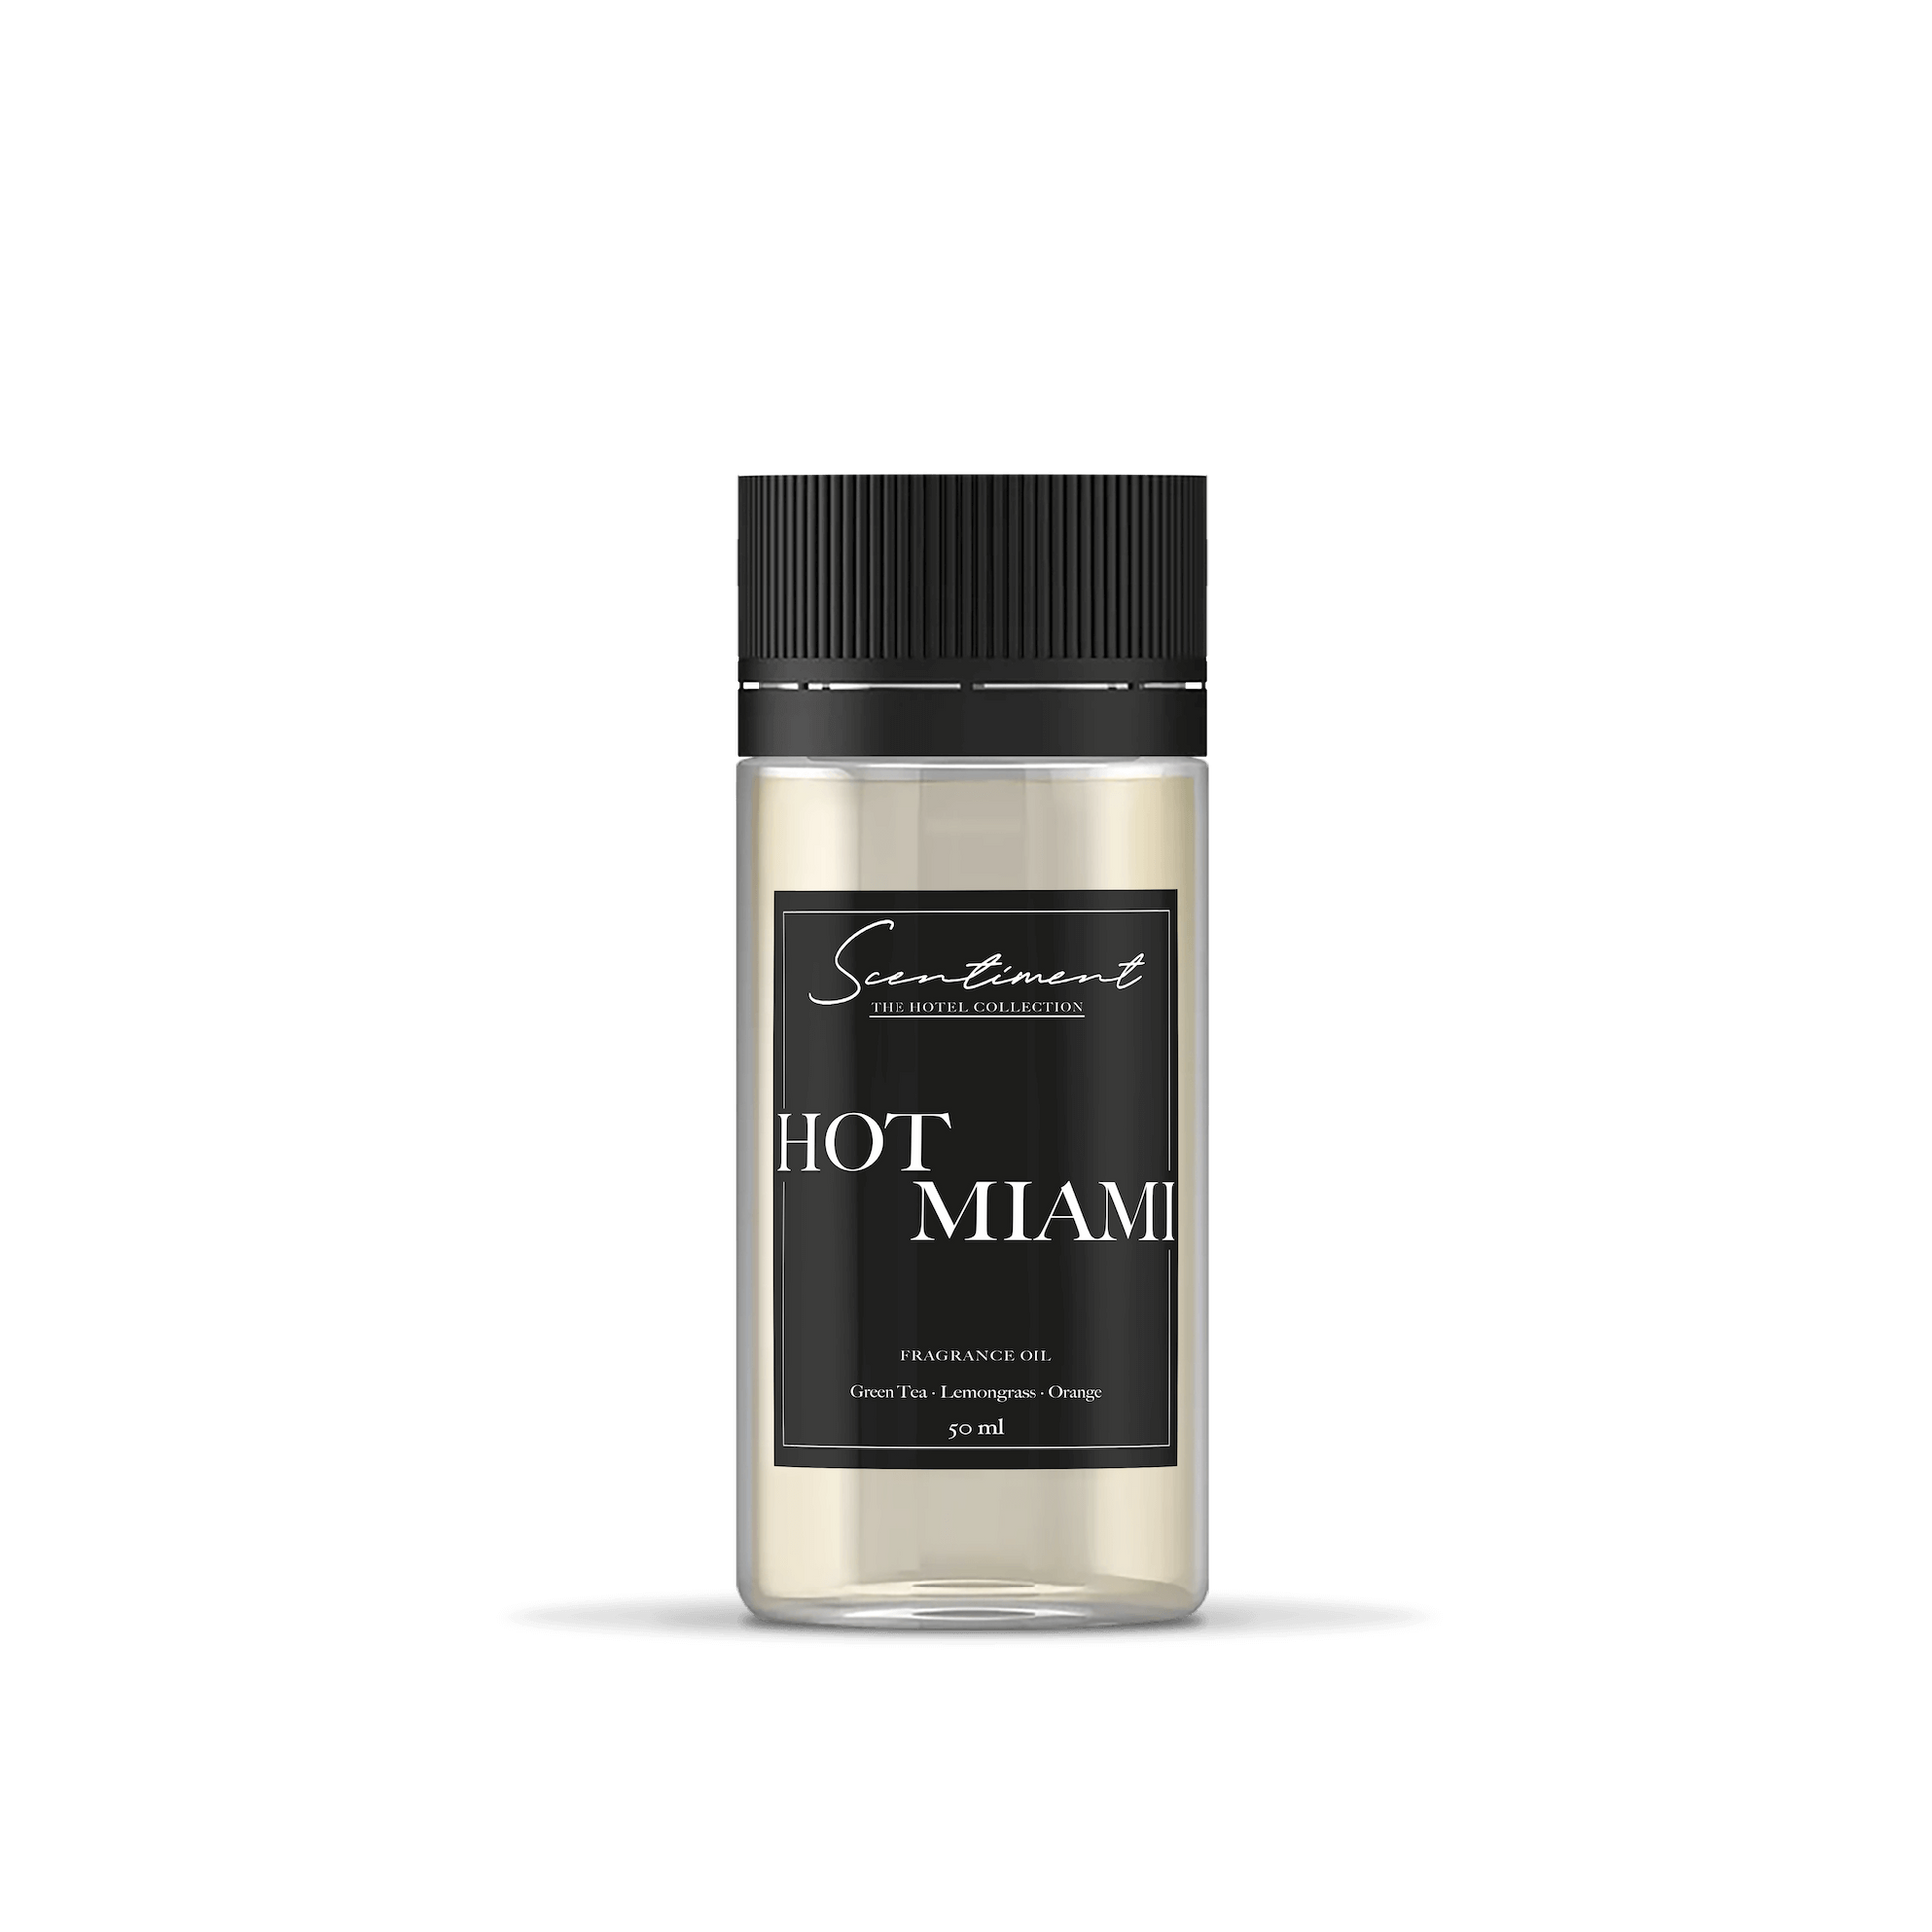 Hot Miami Fragrance Oil inspired by Delano® Beach Club, with notes of  Green Tea, Lemongrass, and Orange.